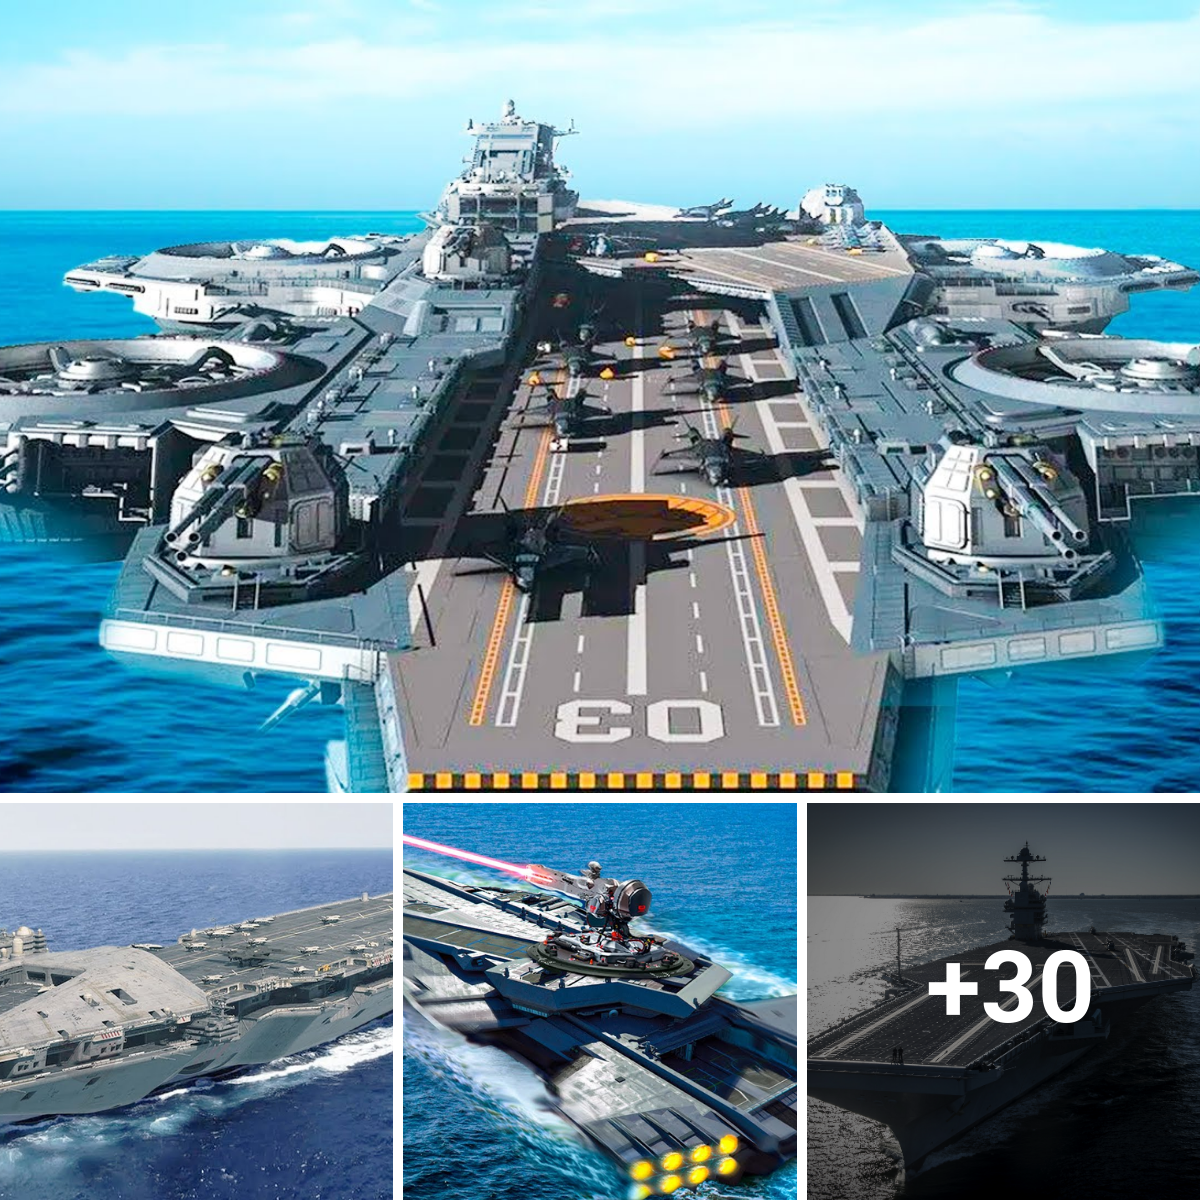 America’s giant aircraft carrier cannot be defeated thanks to billions of dollars worth of engineering